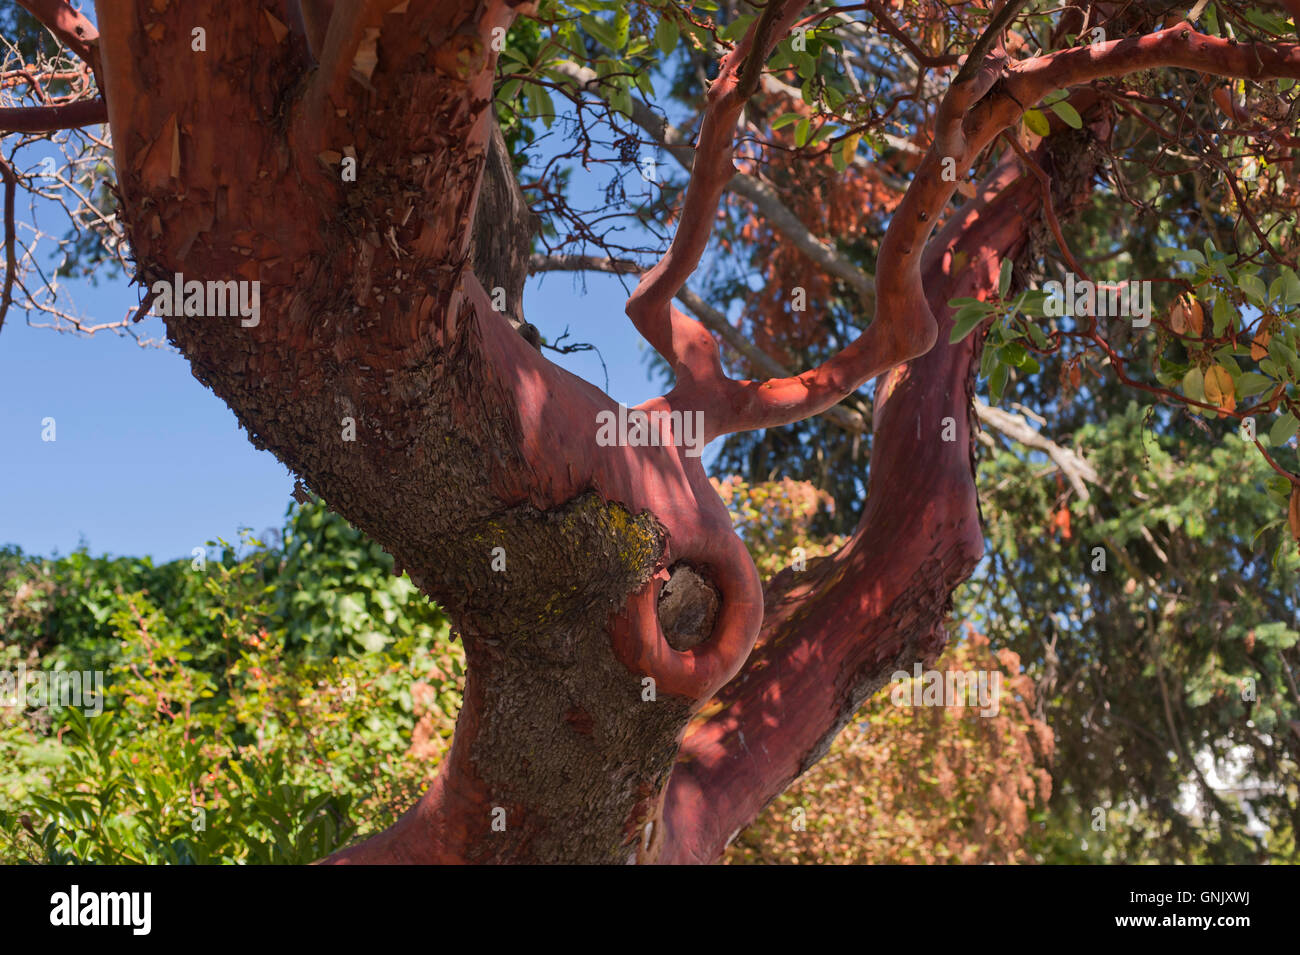 Arbutus tree, showing detail of the flaking trunk bark, Victoria, British Columbia, Canada. Stock Photo